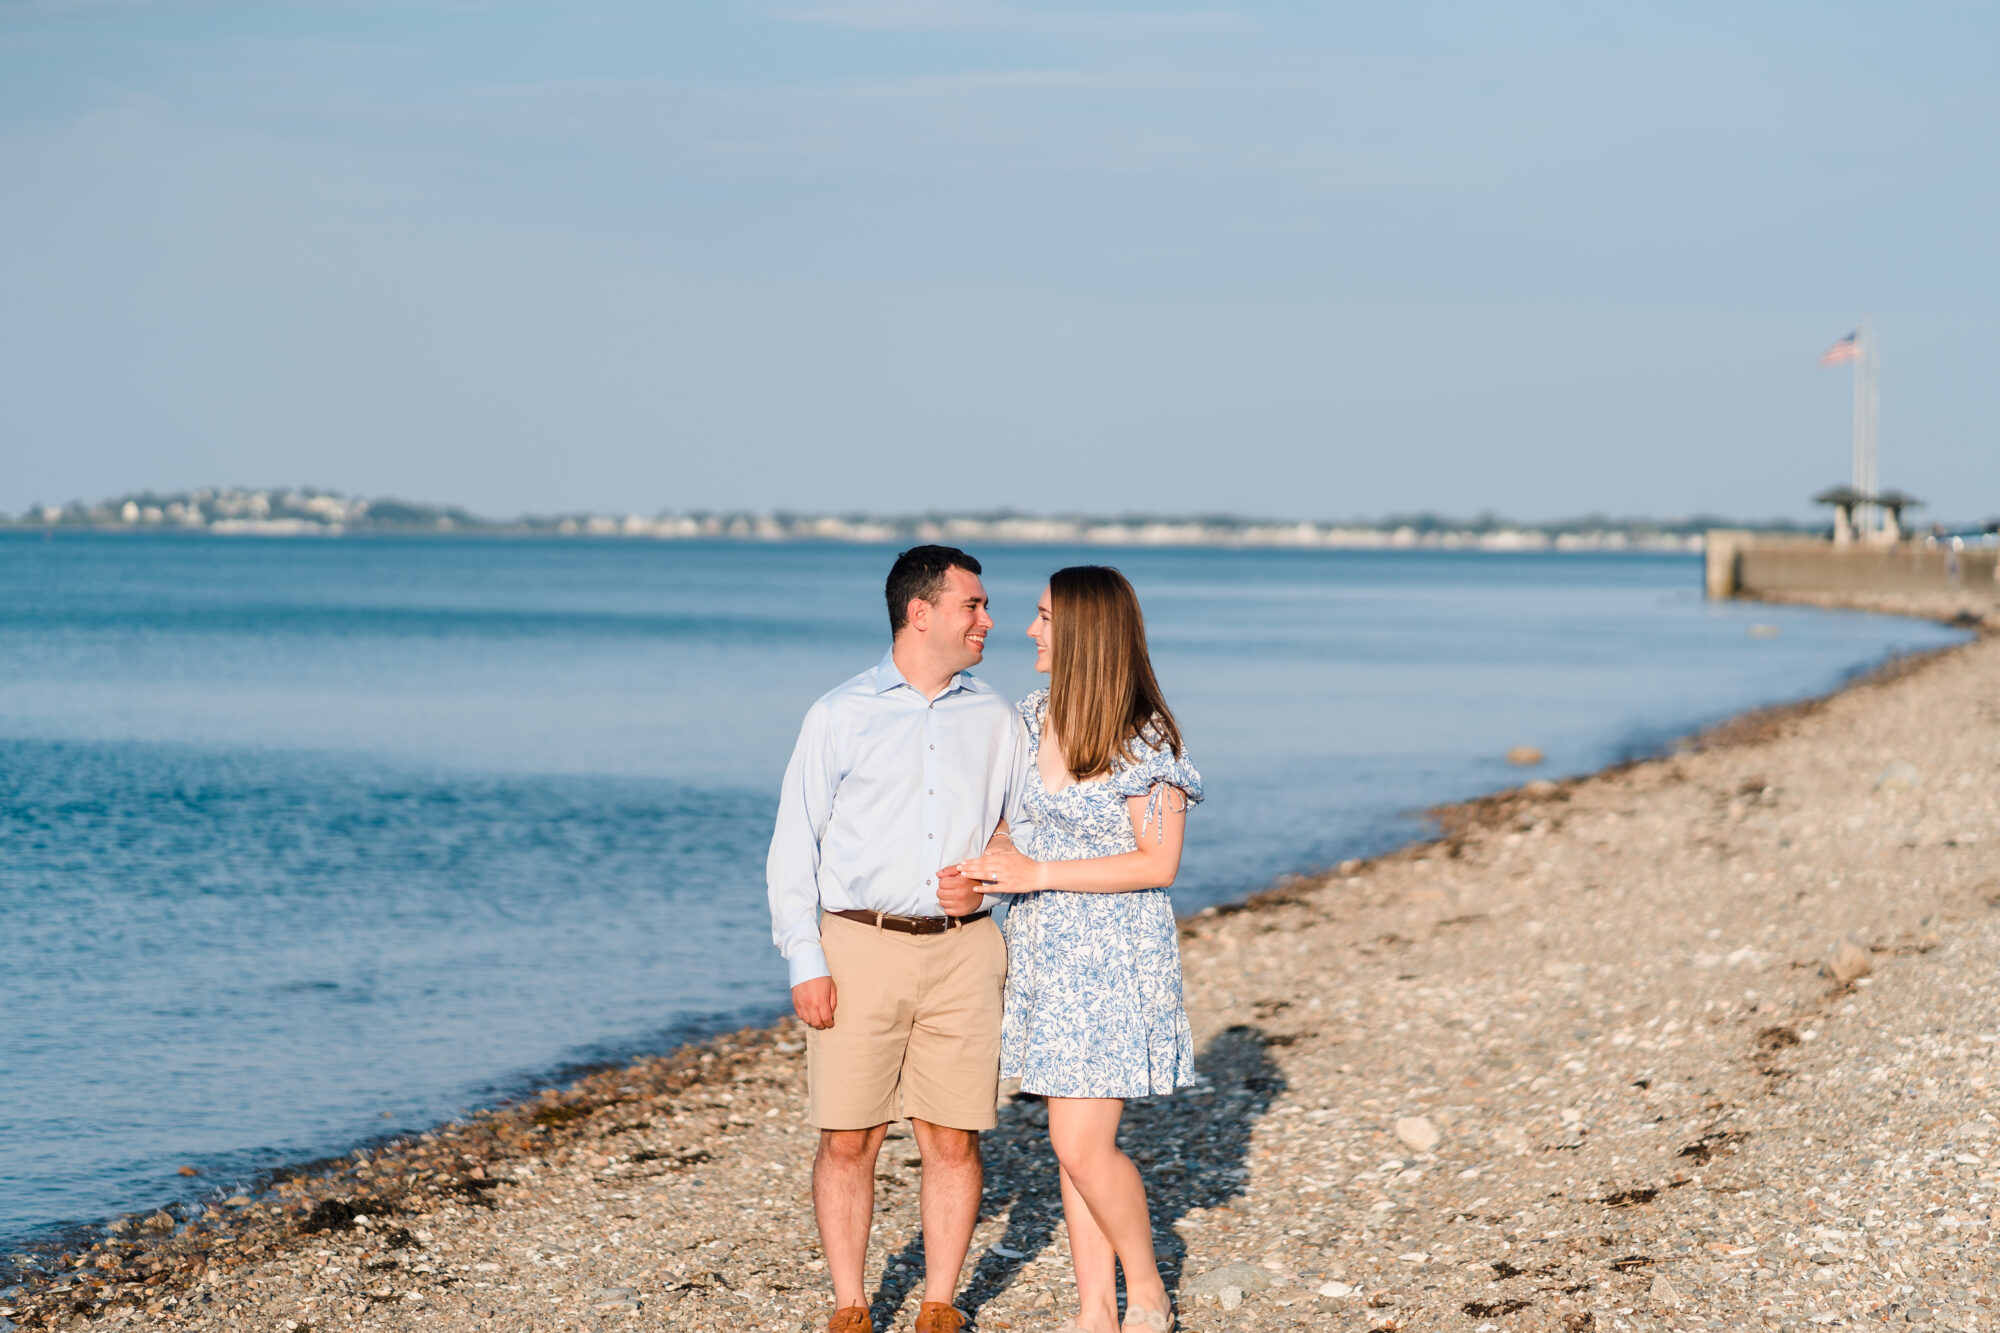 engagement session photos at wollaston beach in quincy, ma